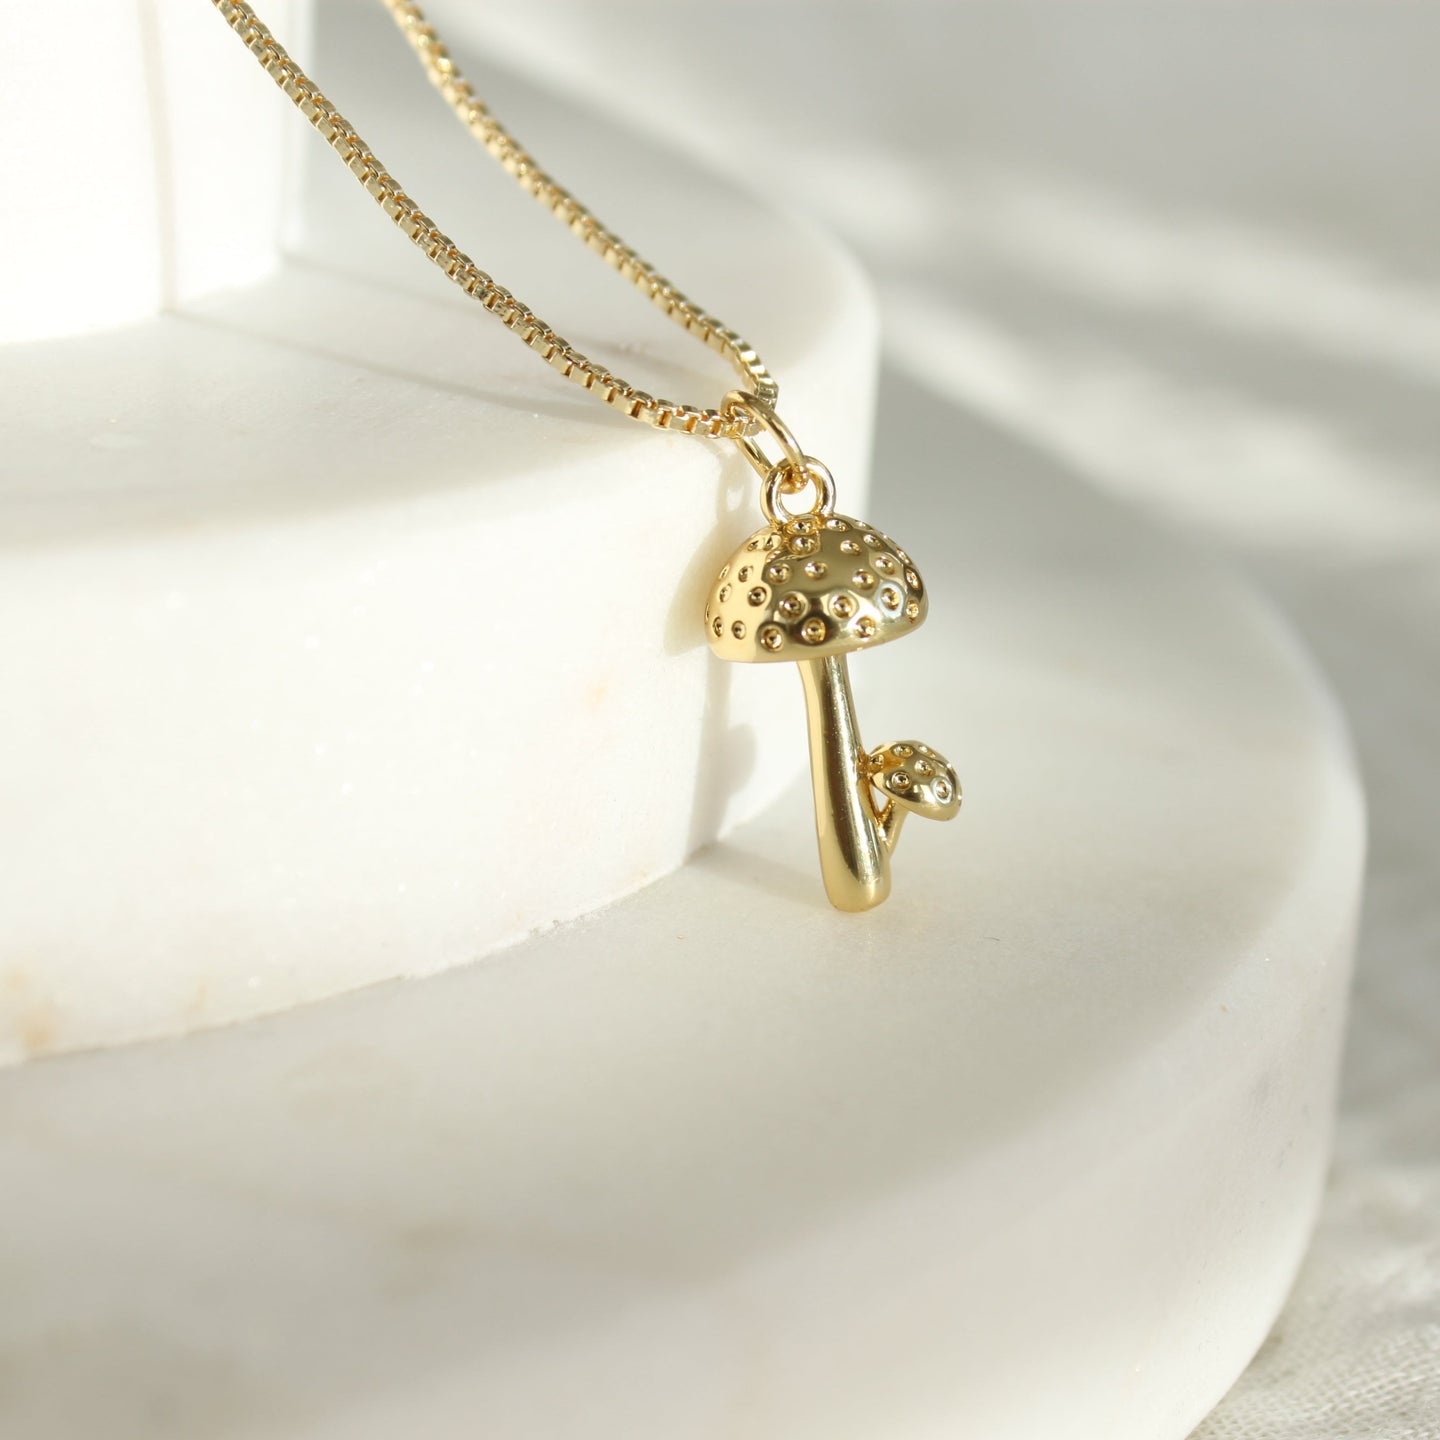 Toadstool Gold Filled Pendant Necklace